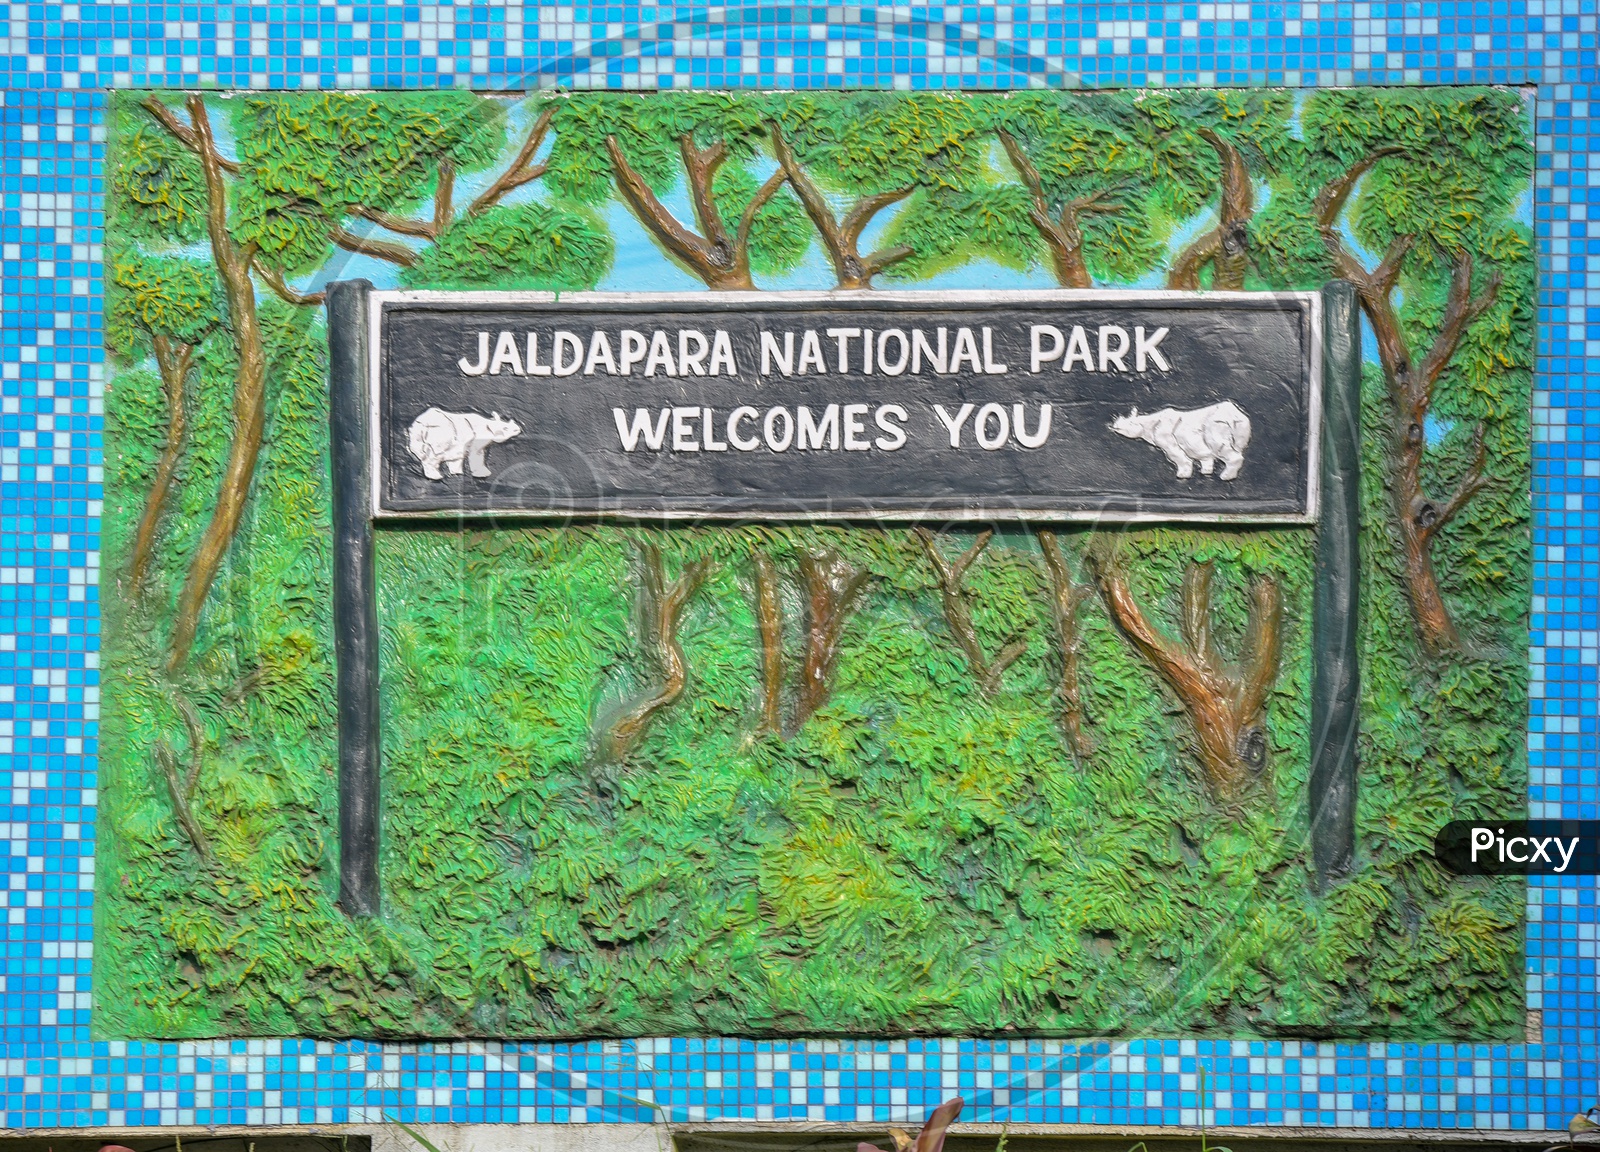 Wall Craving of Jaldapara National Park  on The Walls besides roads in Howrah